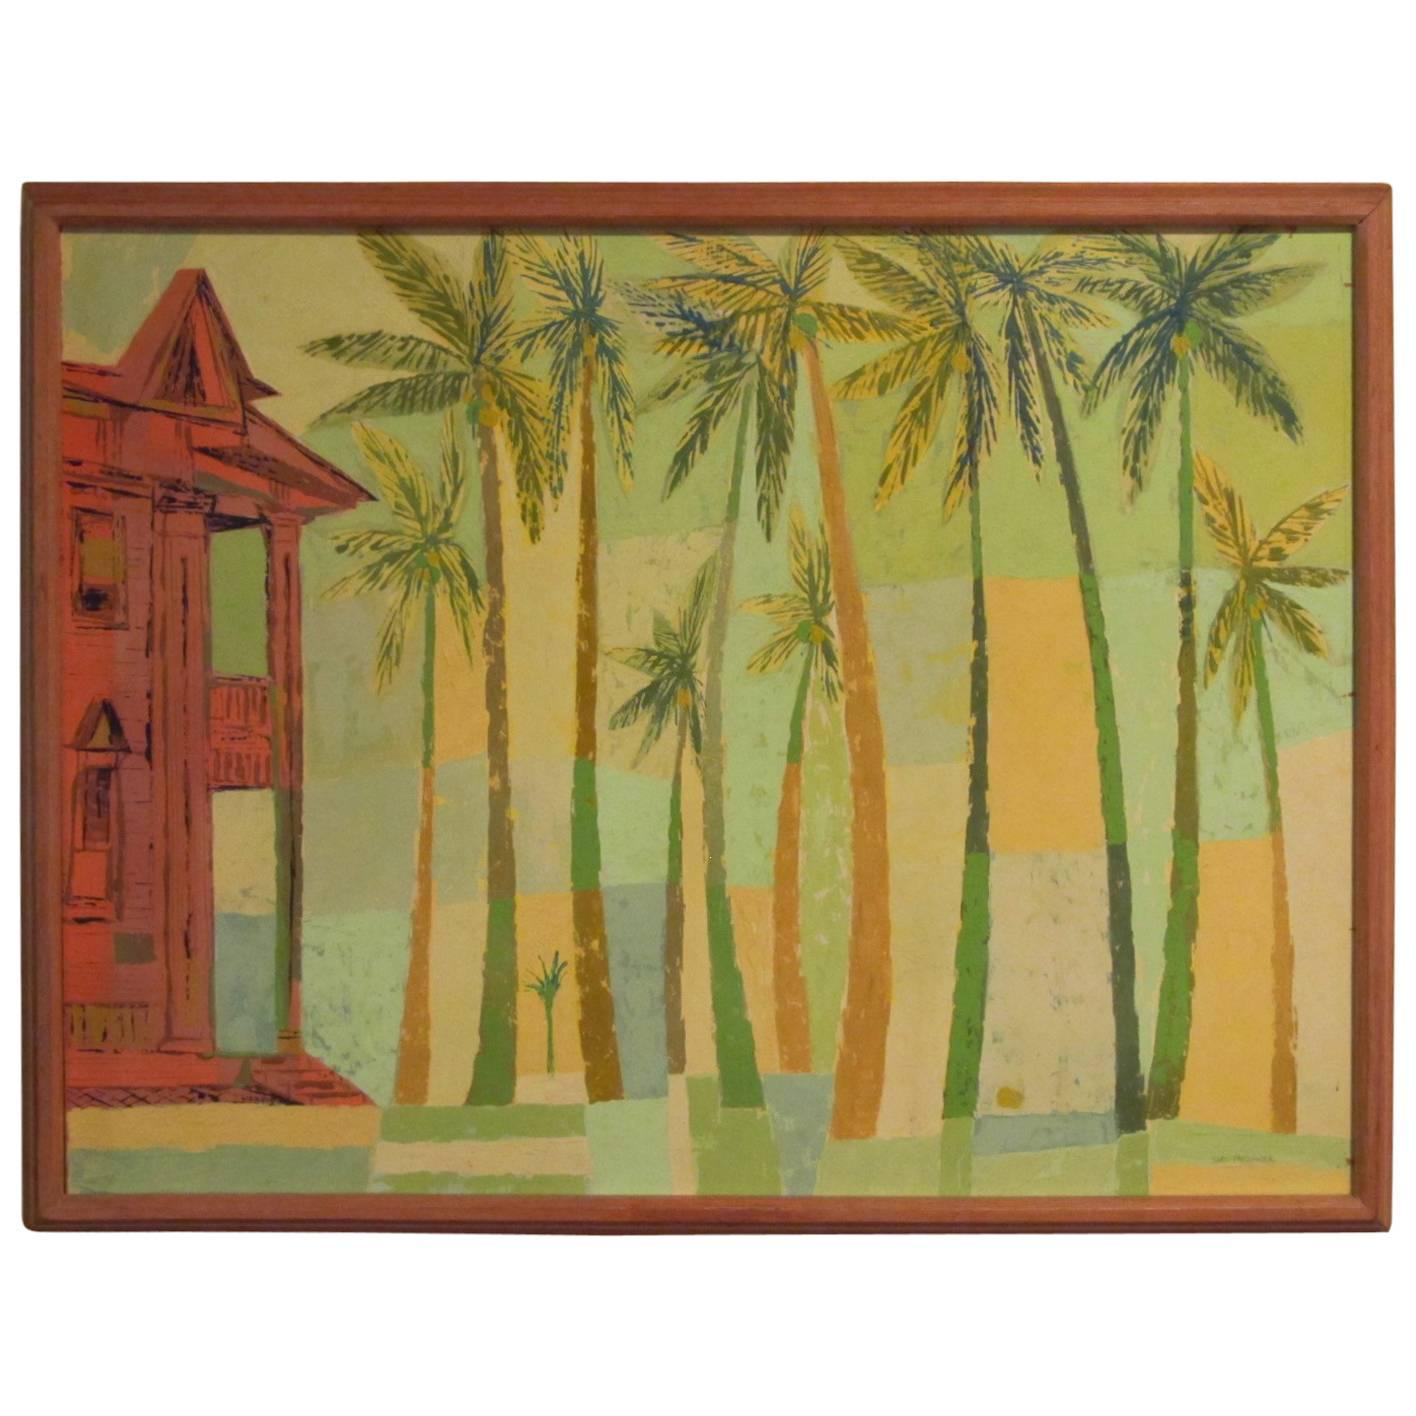 Signed Original Painting "Kailua Coconut Grove" by Earl Thollander